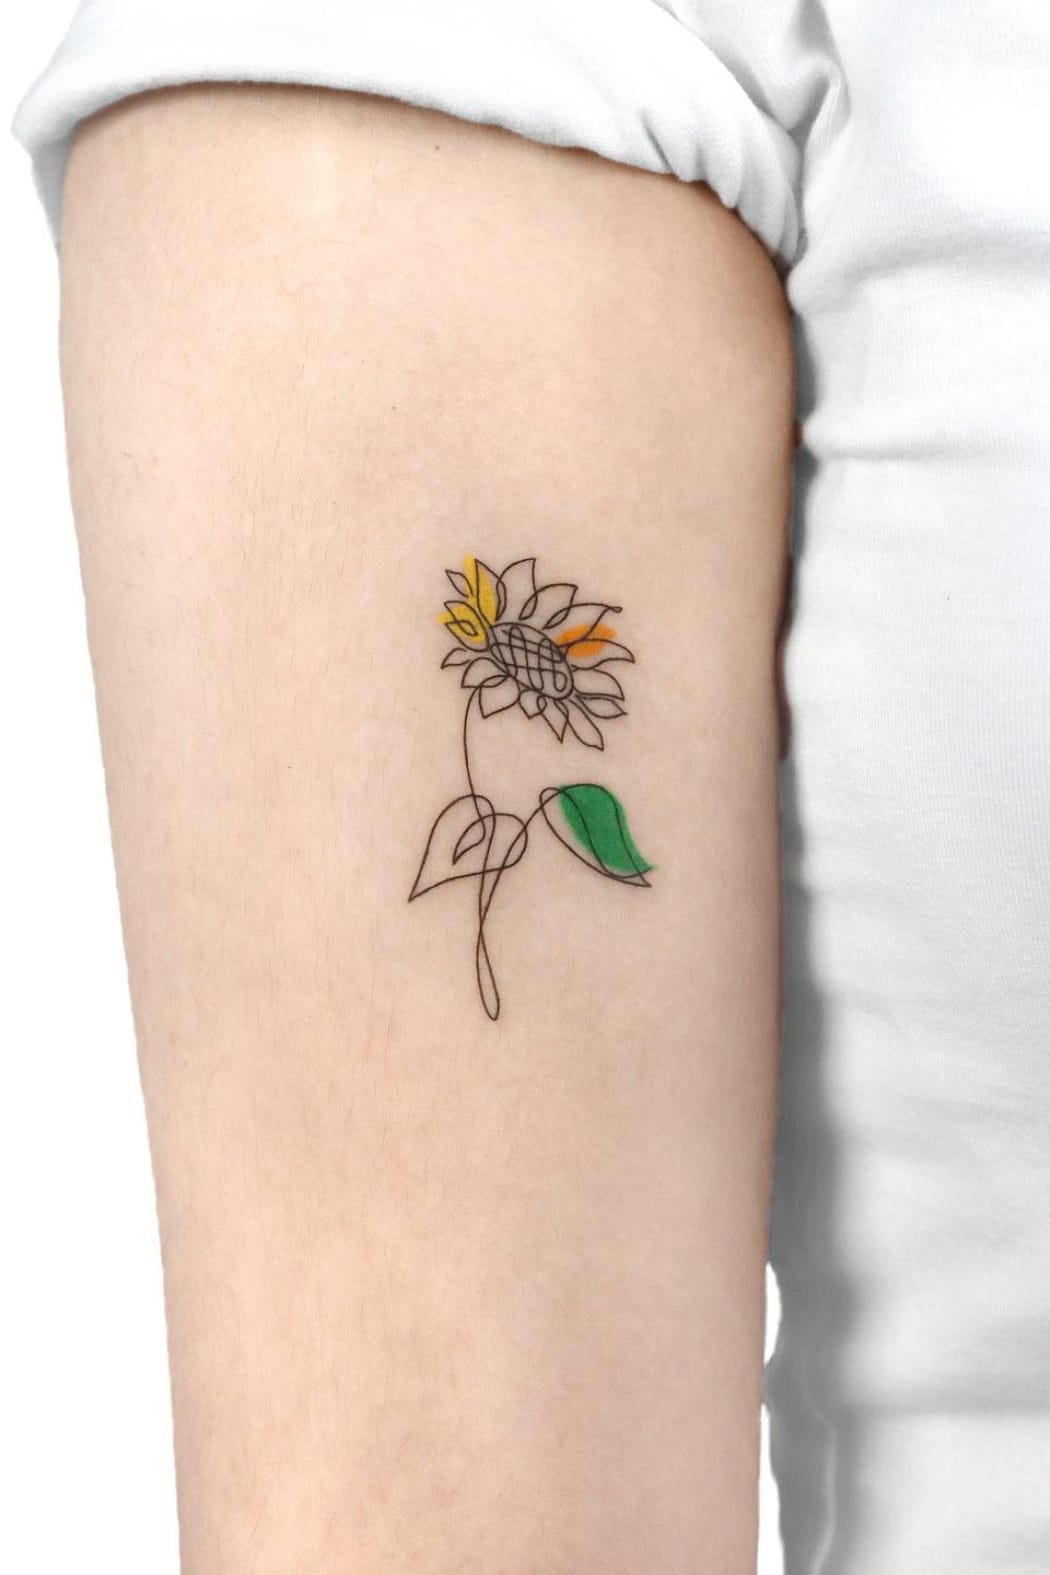 small watercolor sunflower tattoo